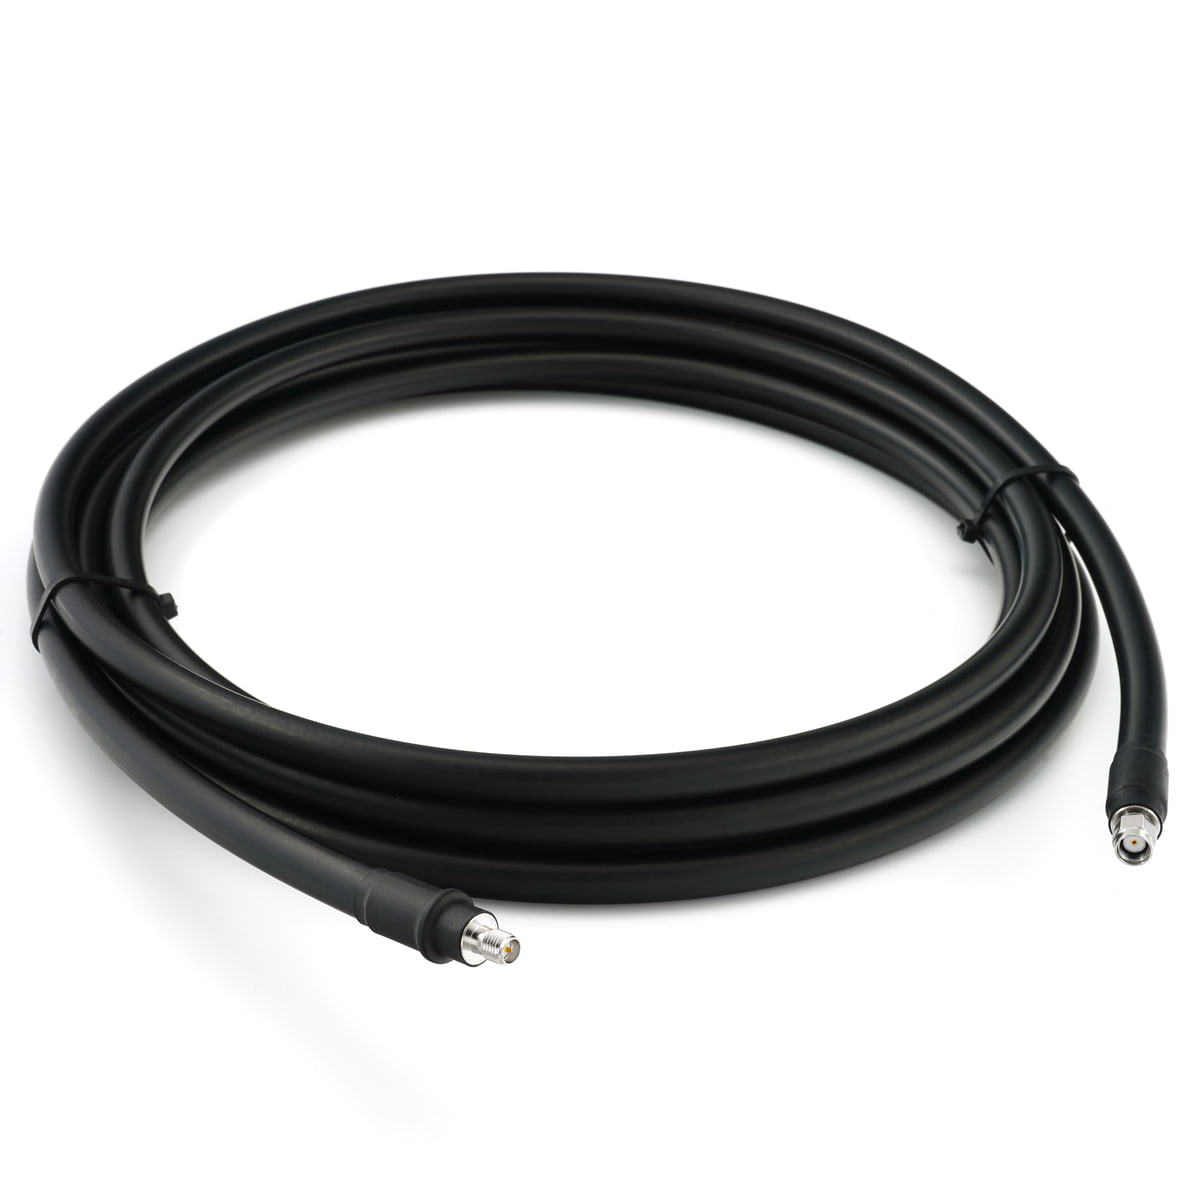 8D-FB RP-SMA Male - RP-SMA Female Coaxial Cable